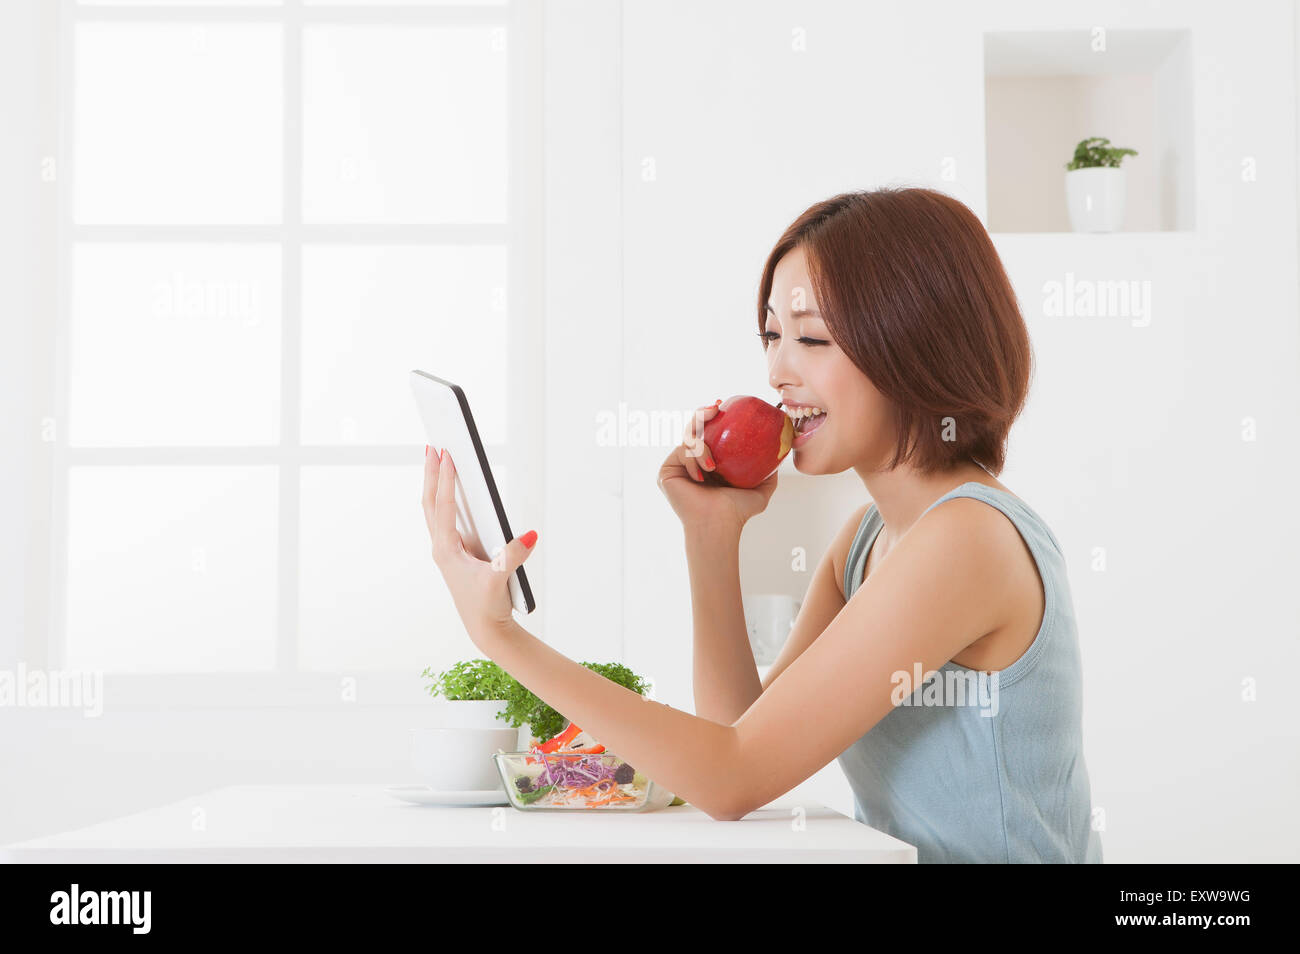 Young woman holding an apple and using touch pad, Stock Photo